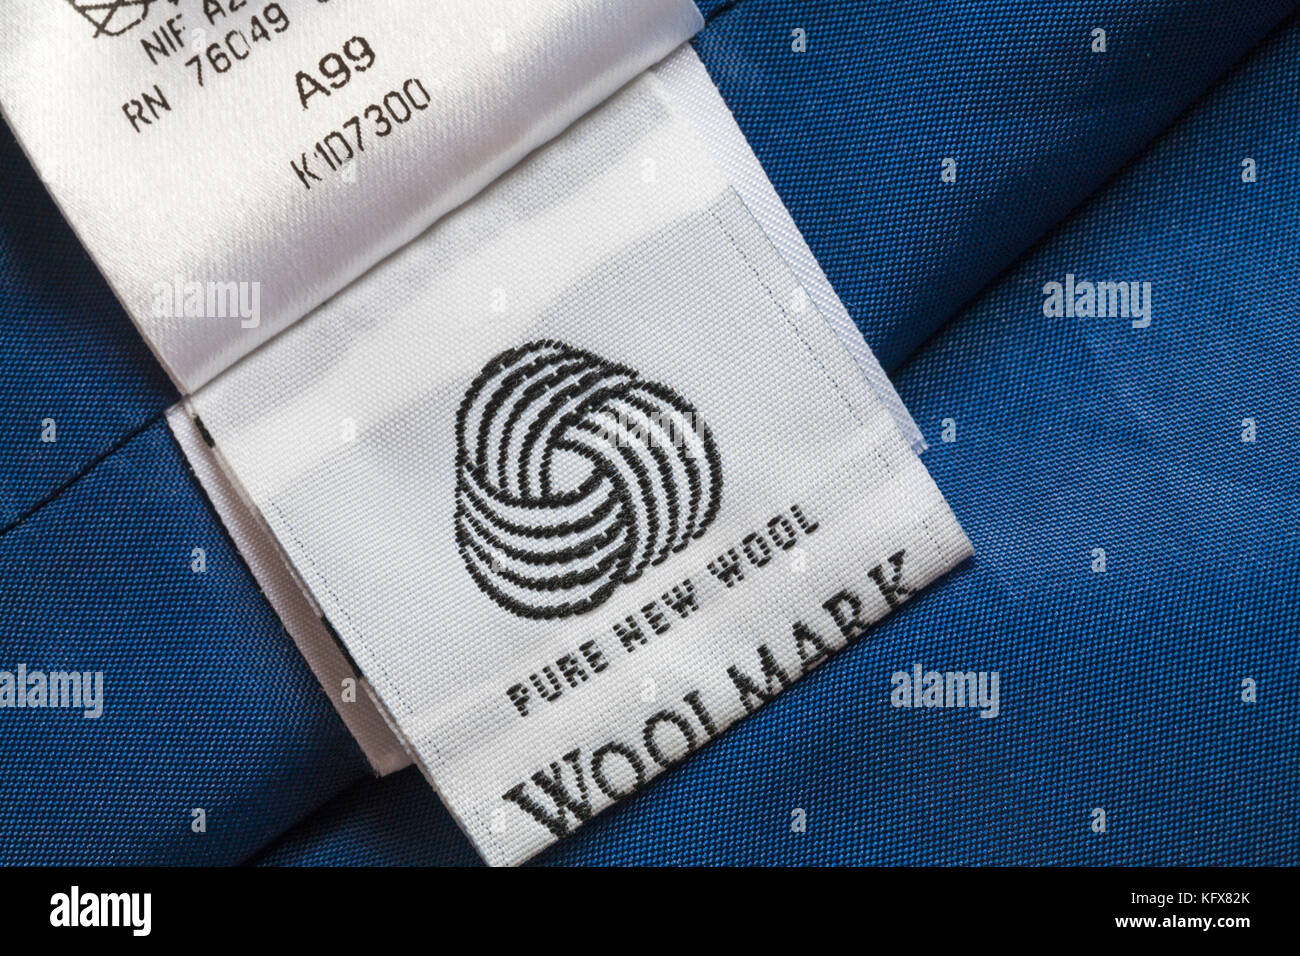 Woolmark pure new wool symbol on label in woman's blue suit clothing Stock Photo